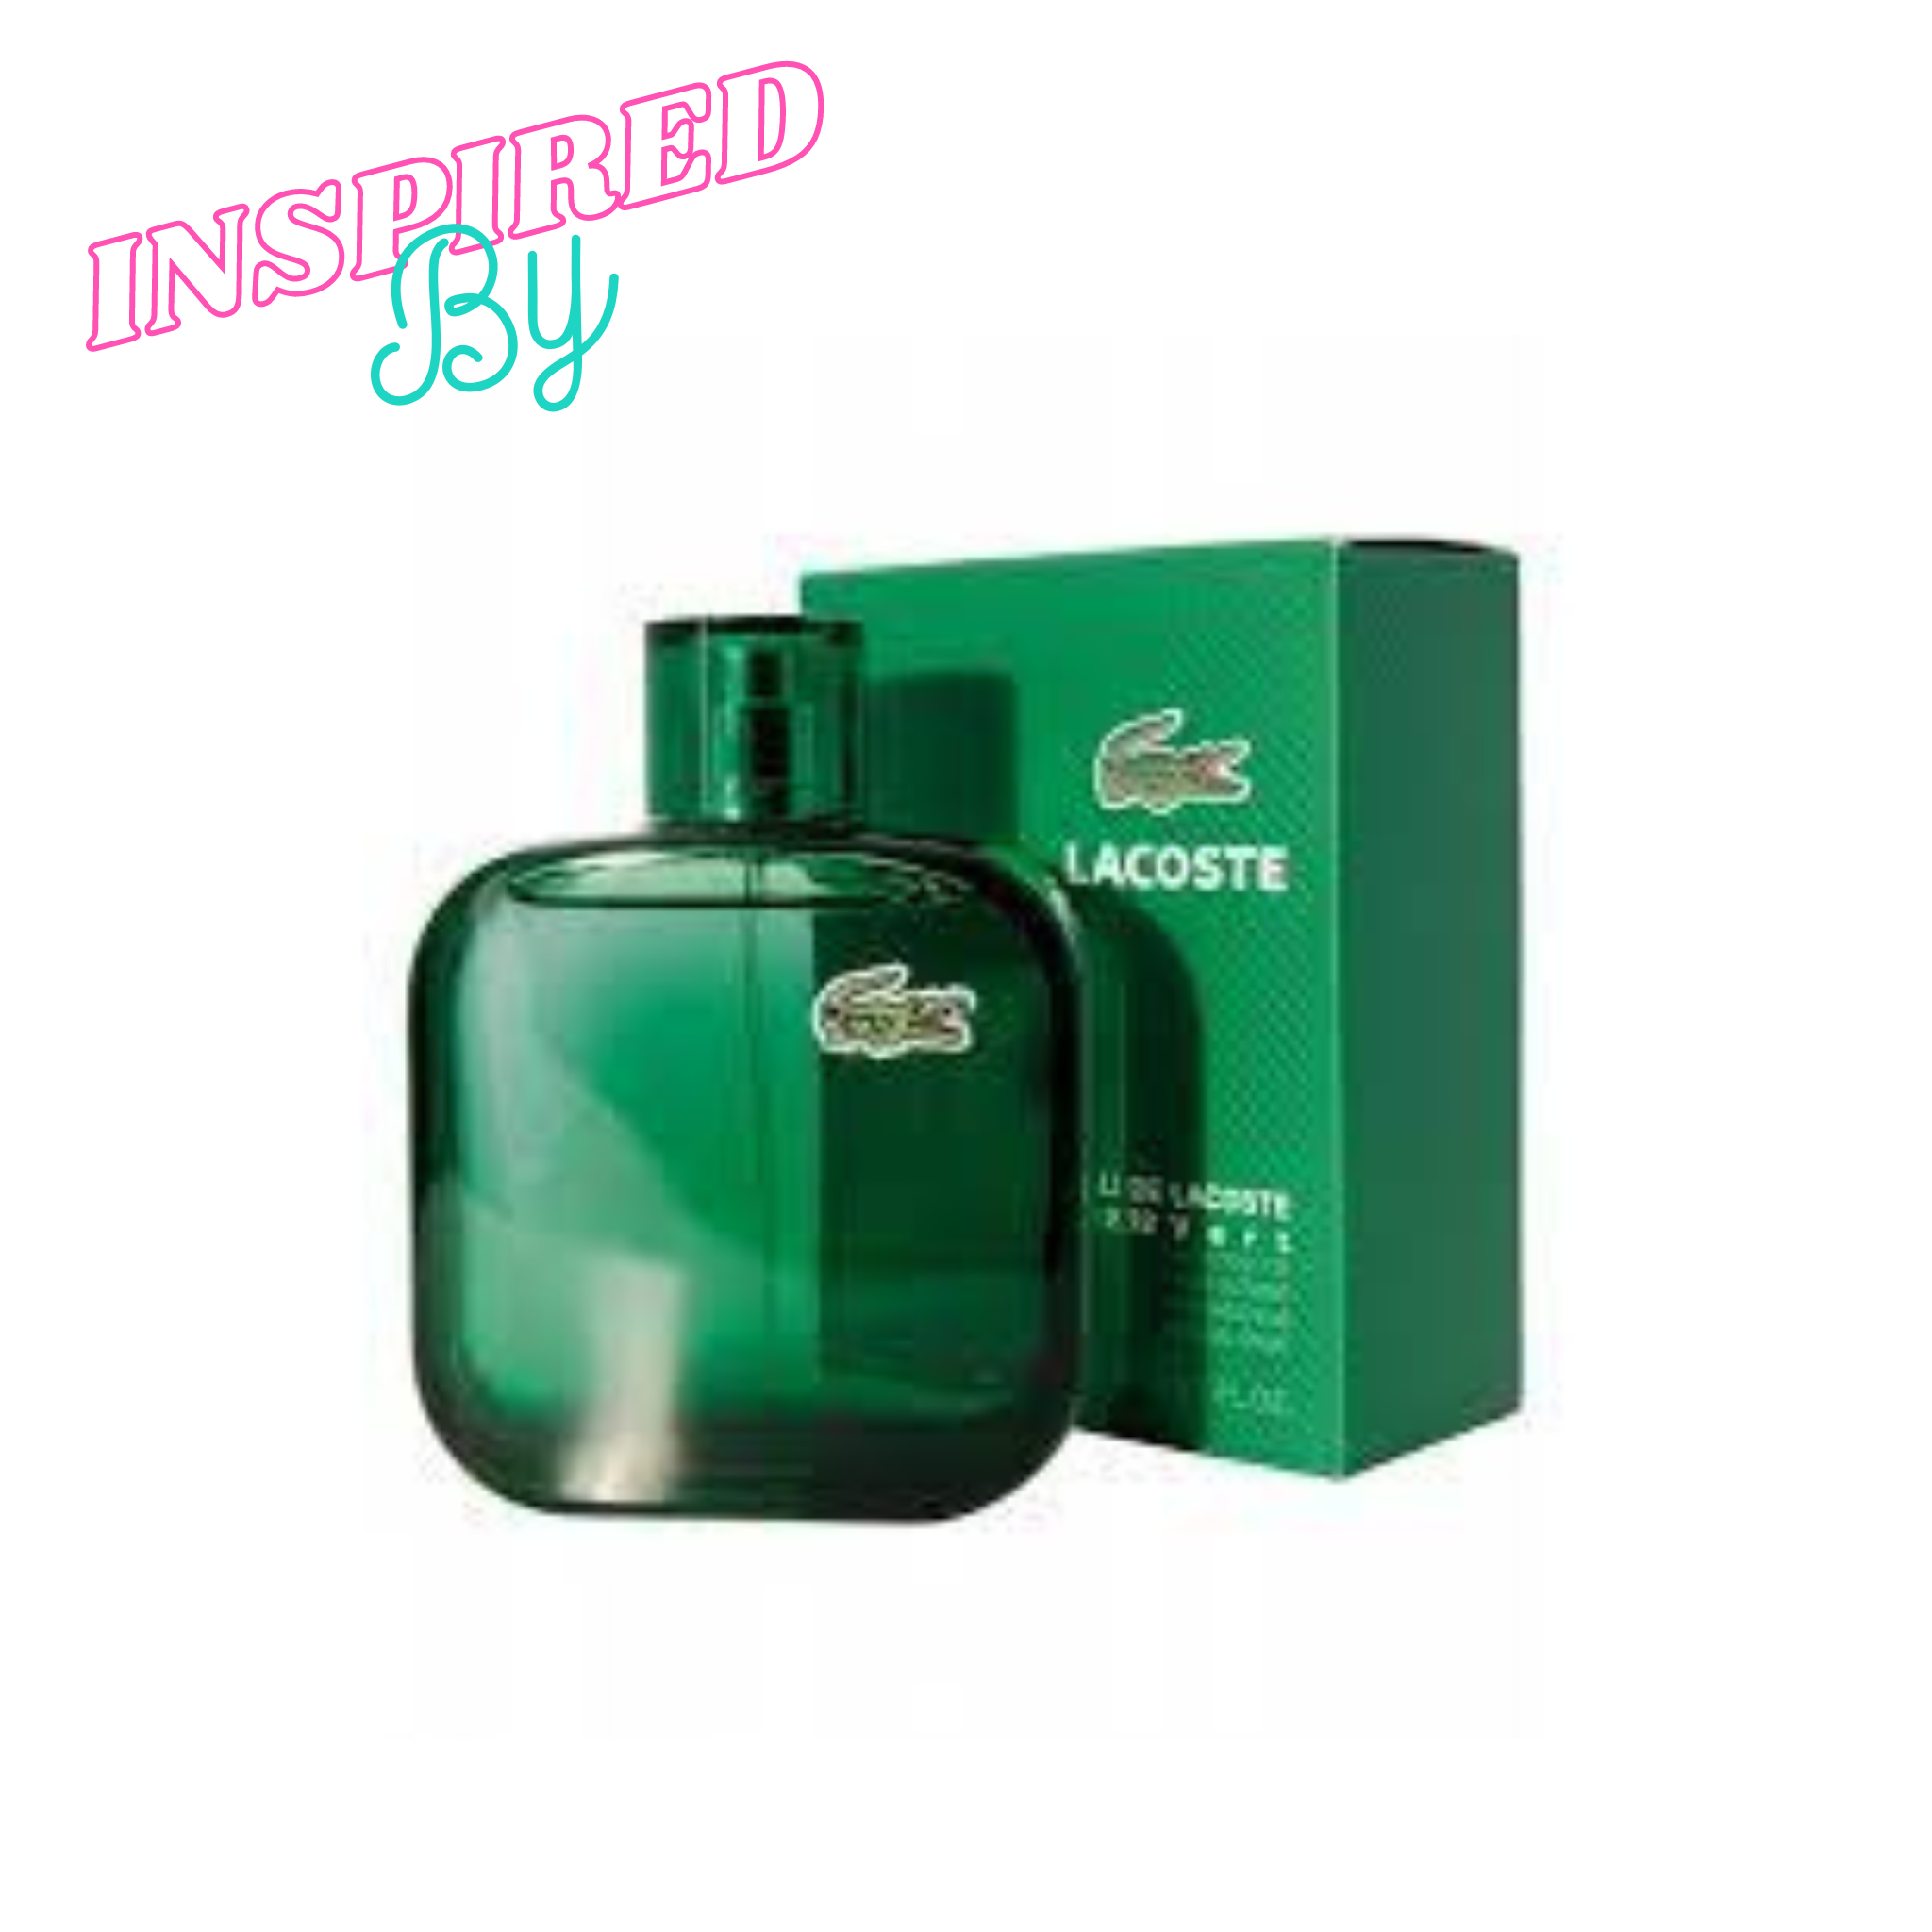 Inspired By Lacoste La Coste Green 100ml - Fragrance Deliver SA